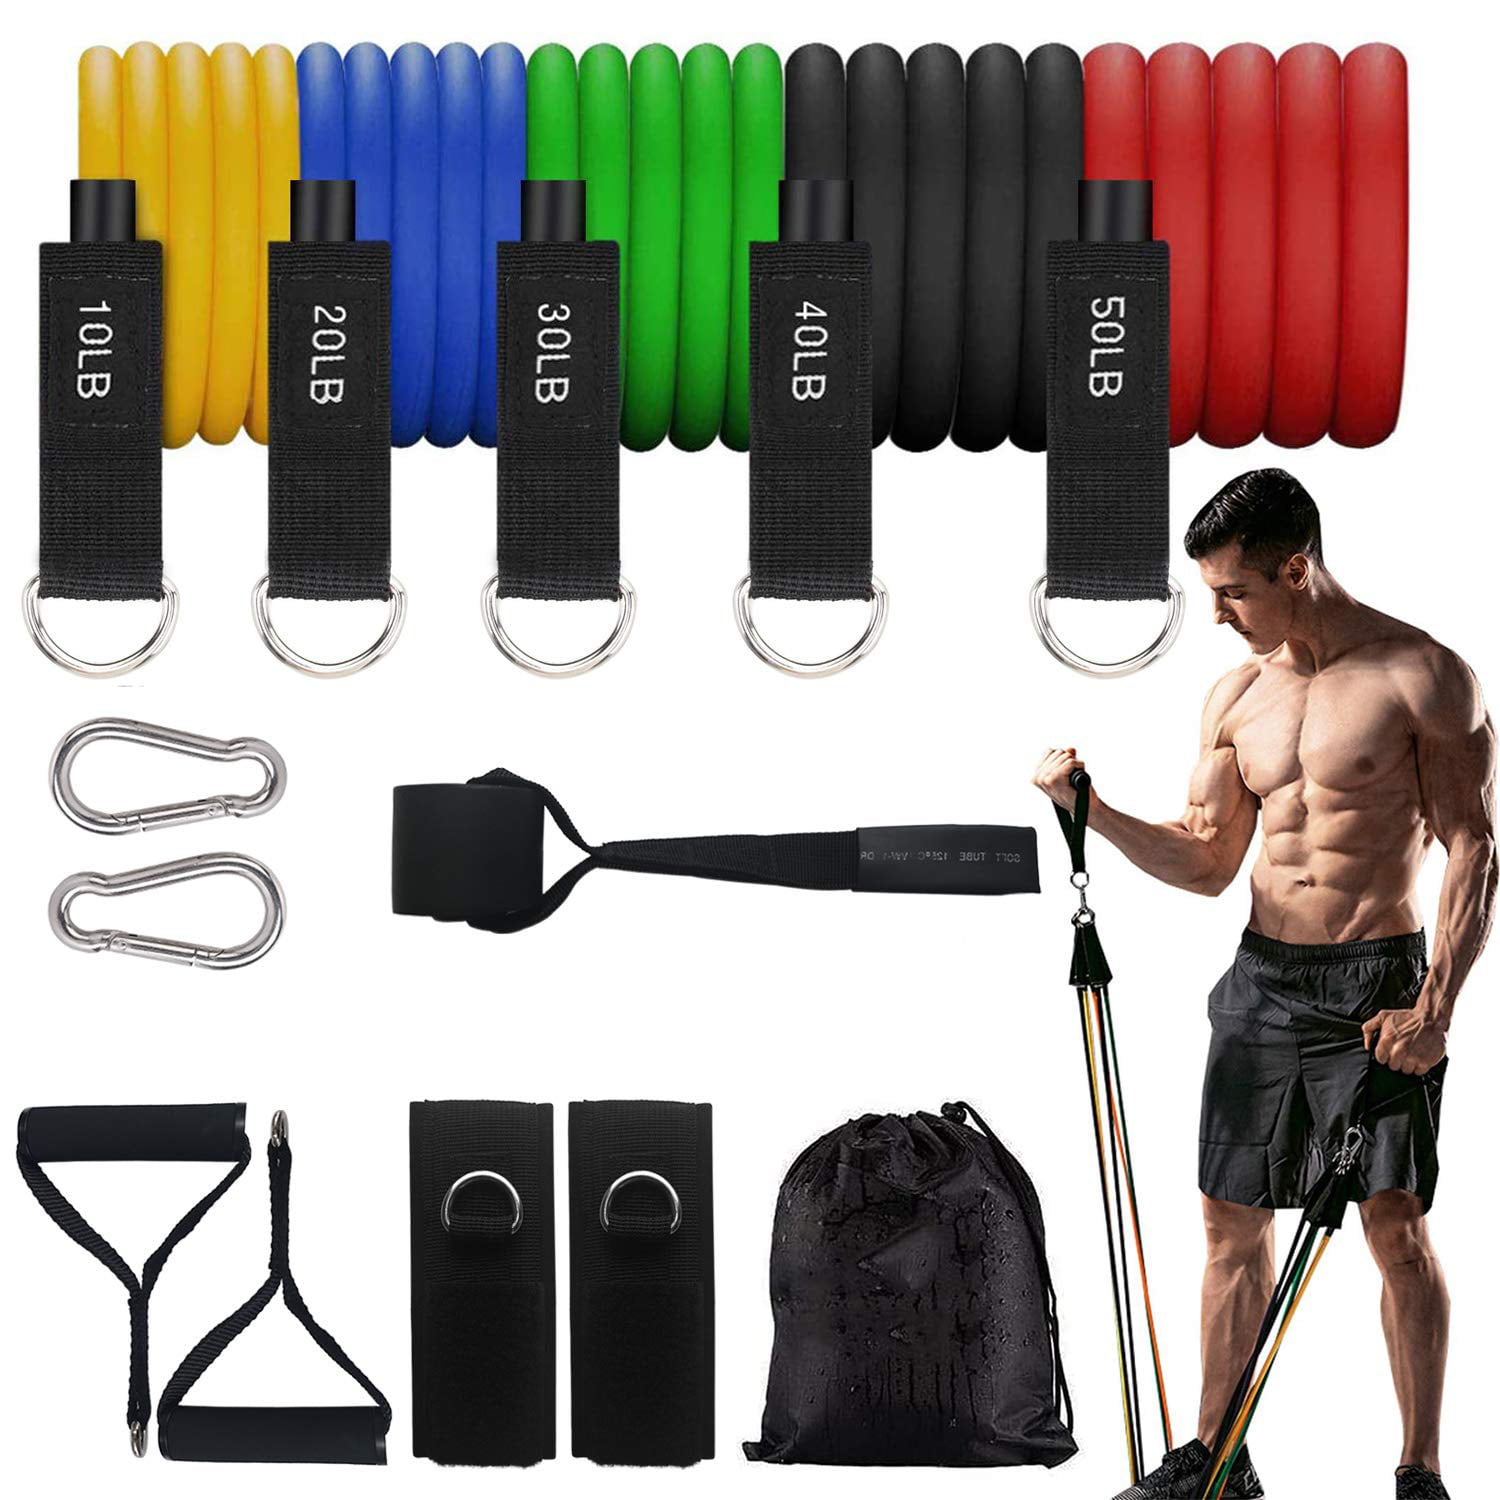 150LB Pull Rope Set Exercise Bands Set Men Home Workouts with Fitness Tubes Foam Handles Resistance Bands Exercise Elastic Pull Ropes for Indoor Strength Training Resistance Bands Set